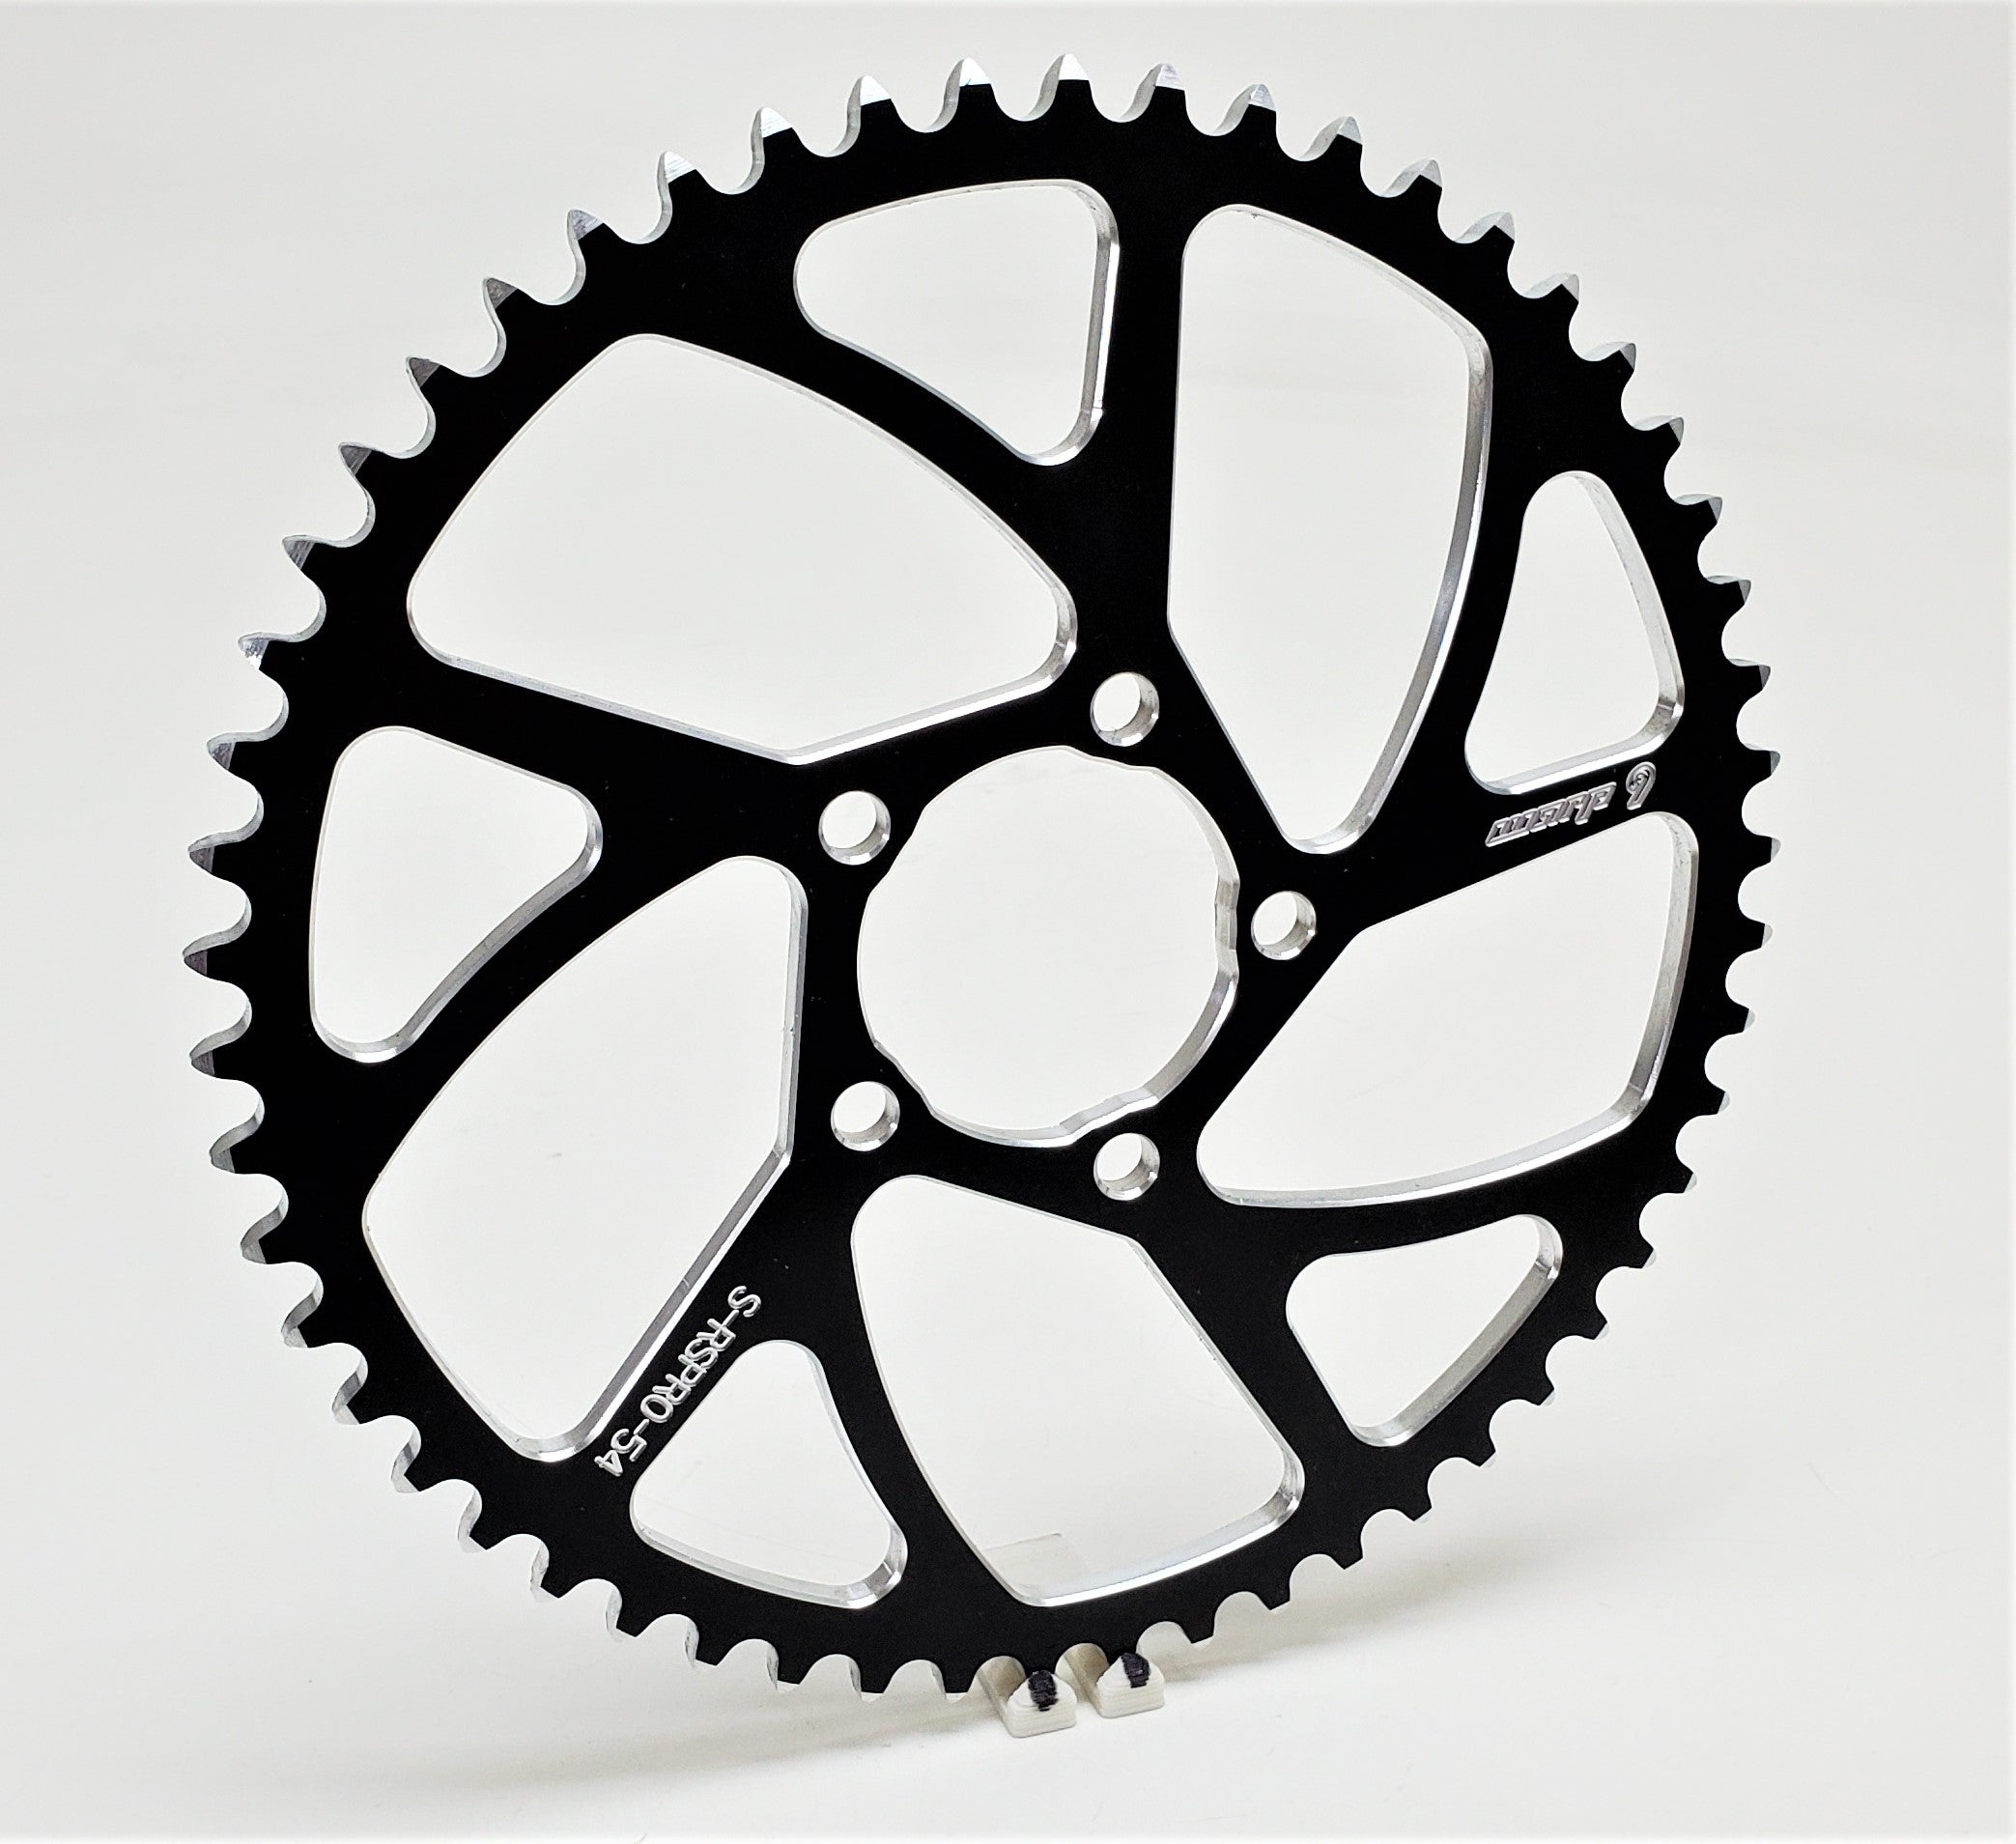 Warp 9 54 tooth sprocket for Surron Lightbee X and Talaria Sting